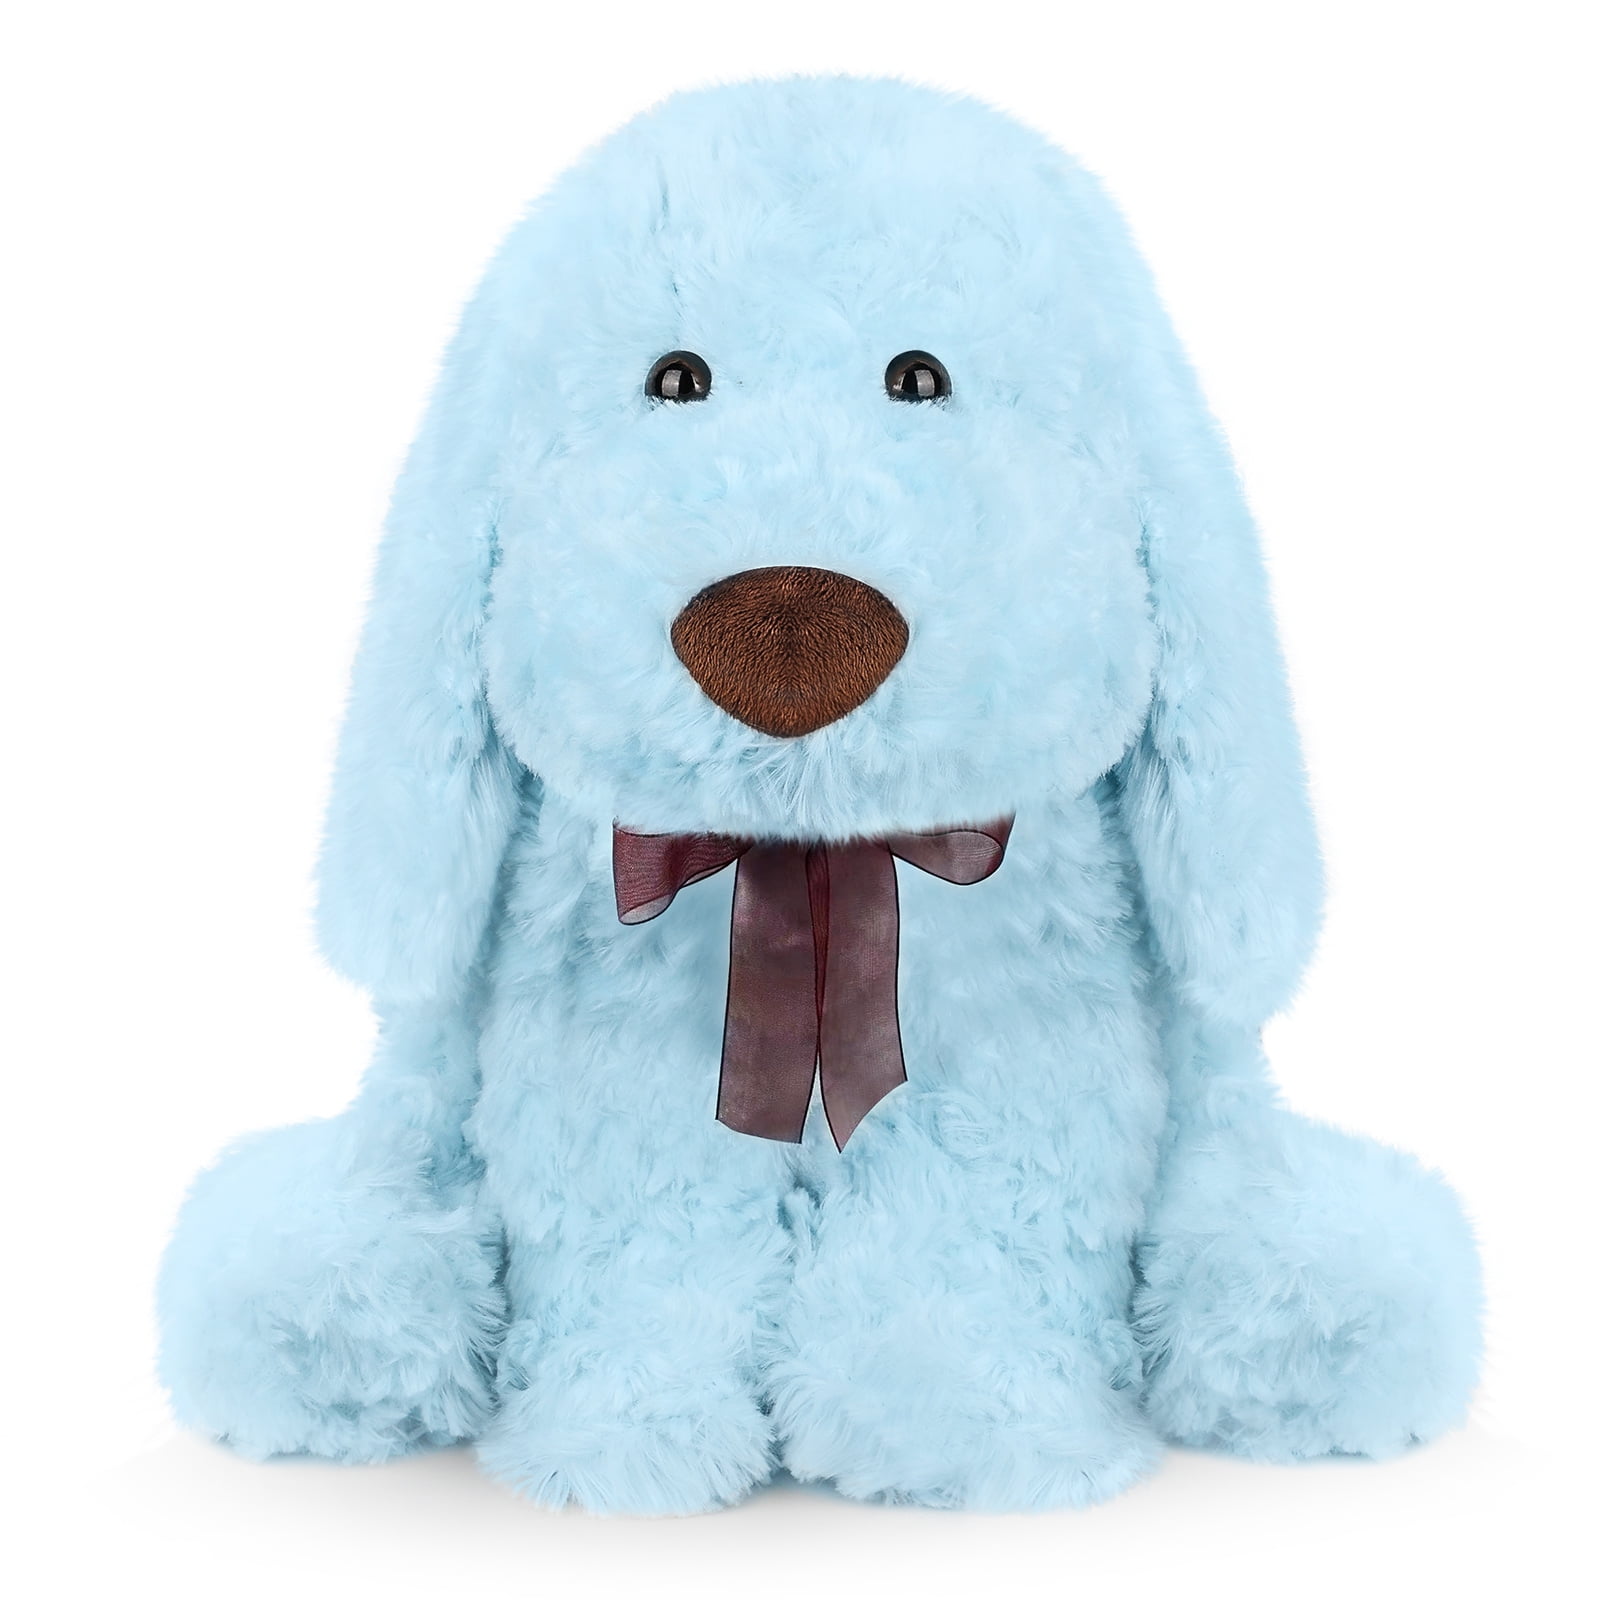 mttdxnh plush stuffed animal puppy dog - adorable goldendoodle for